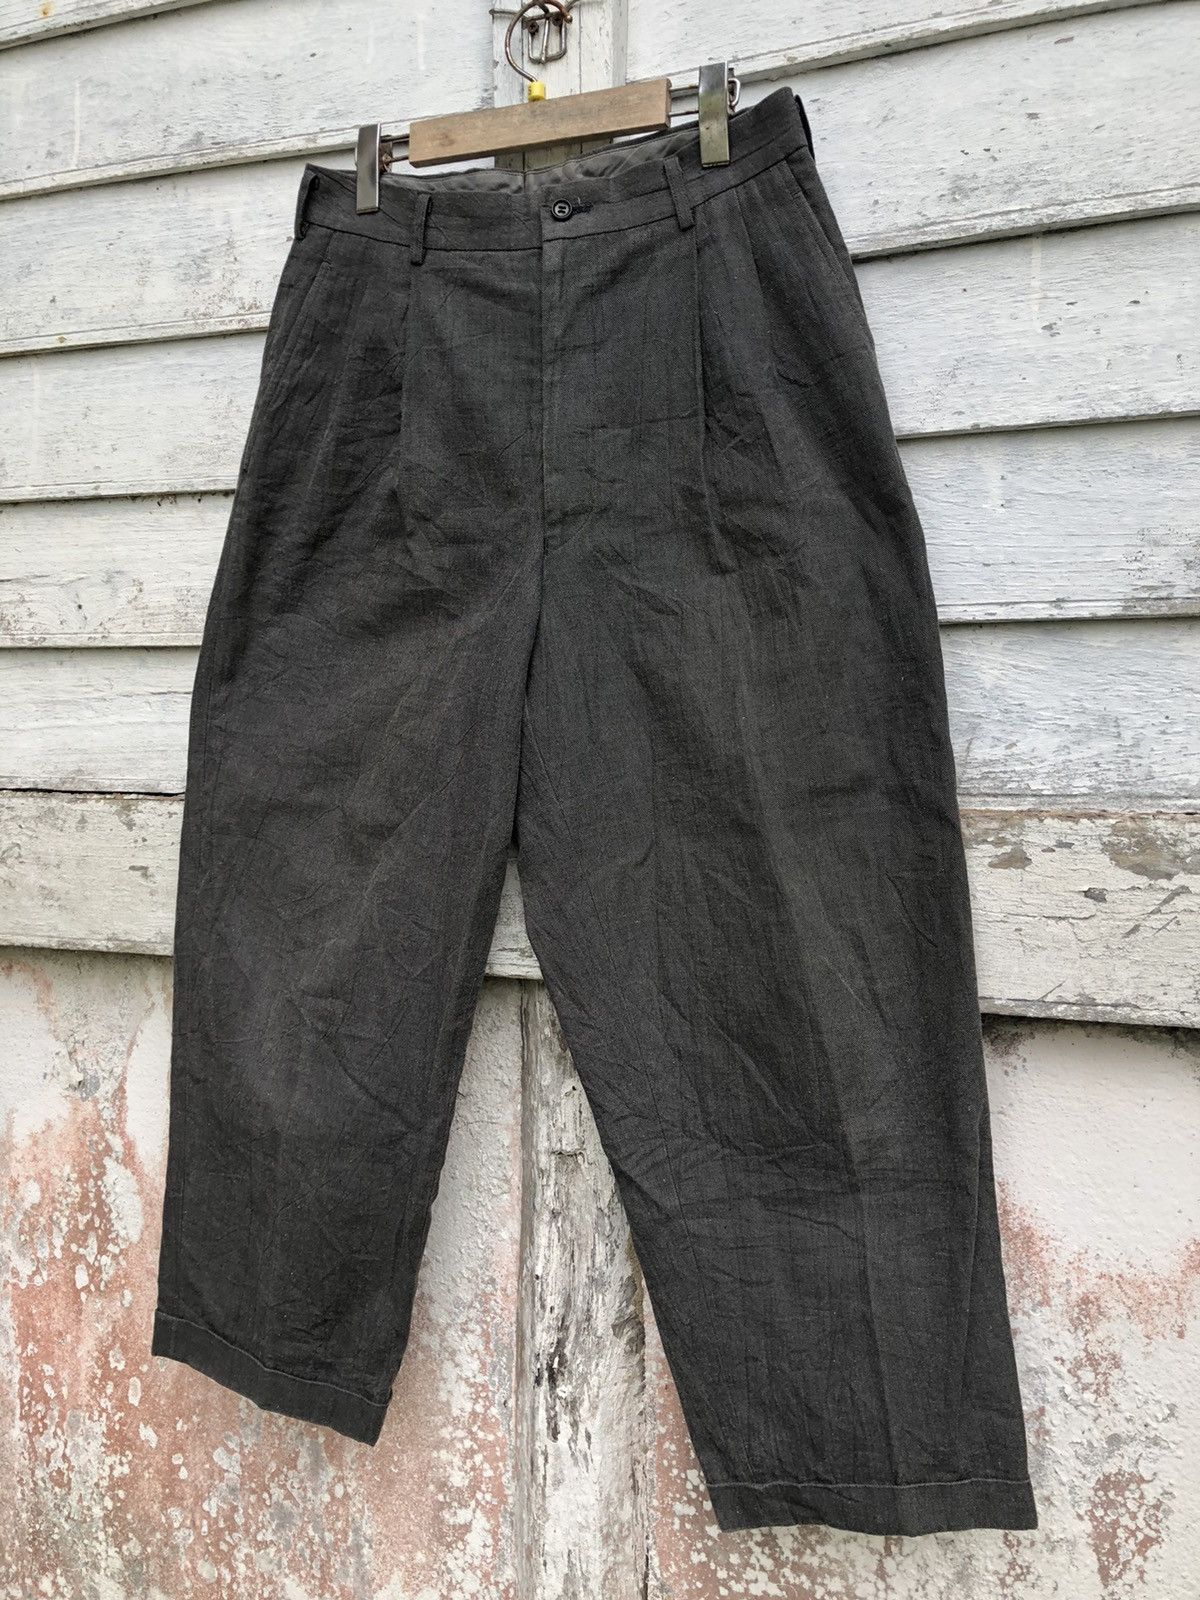 Comme Des Garcon AD 99 Chinos Baggy Cropped Pant - 2